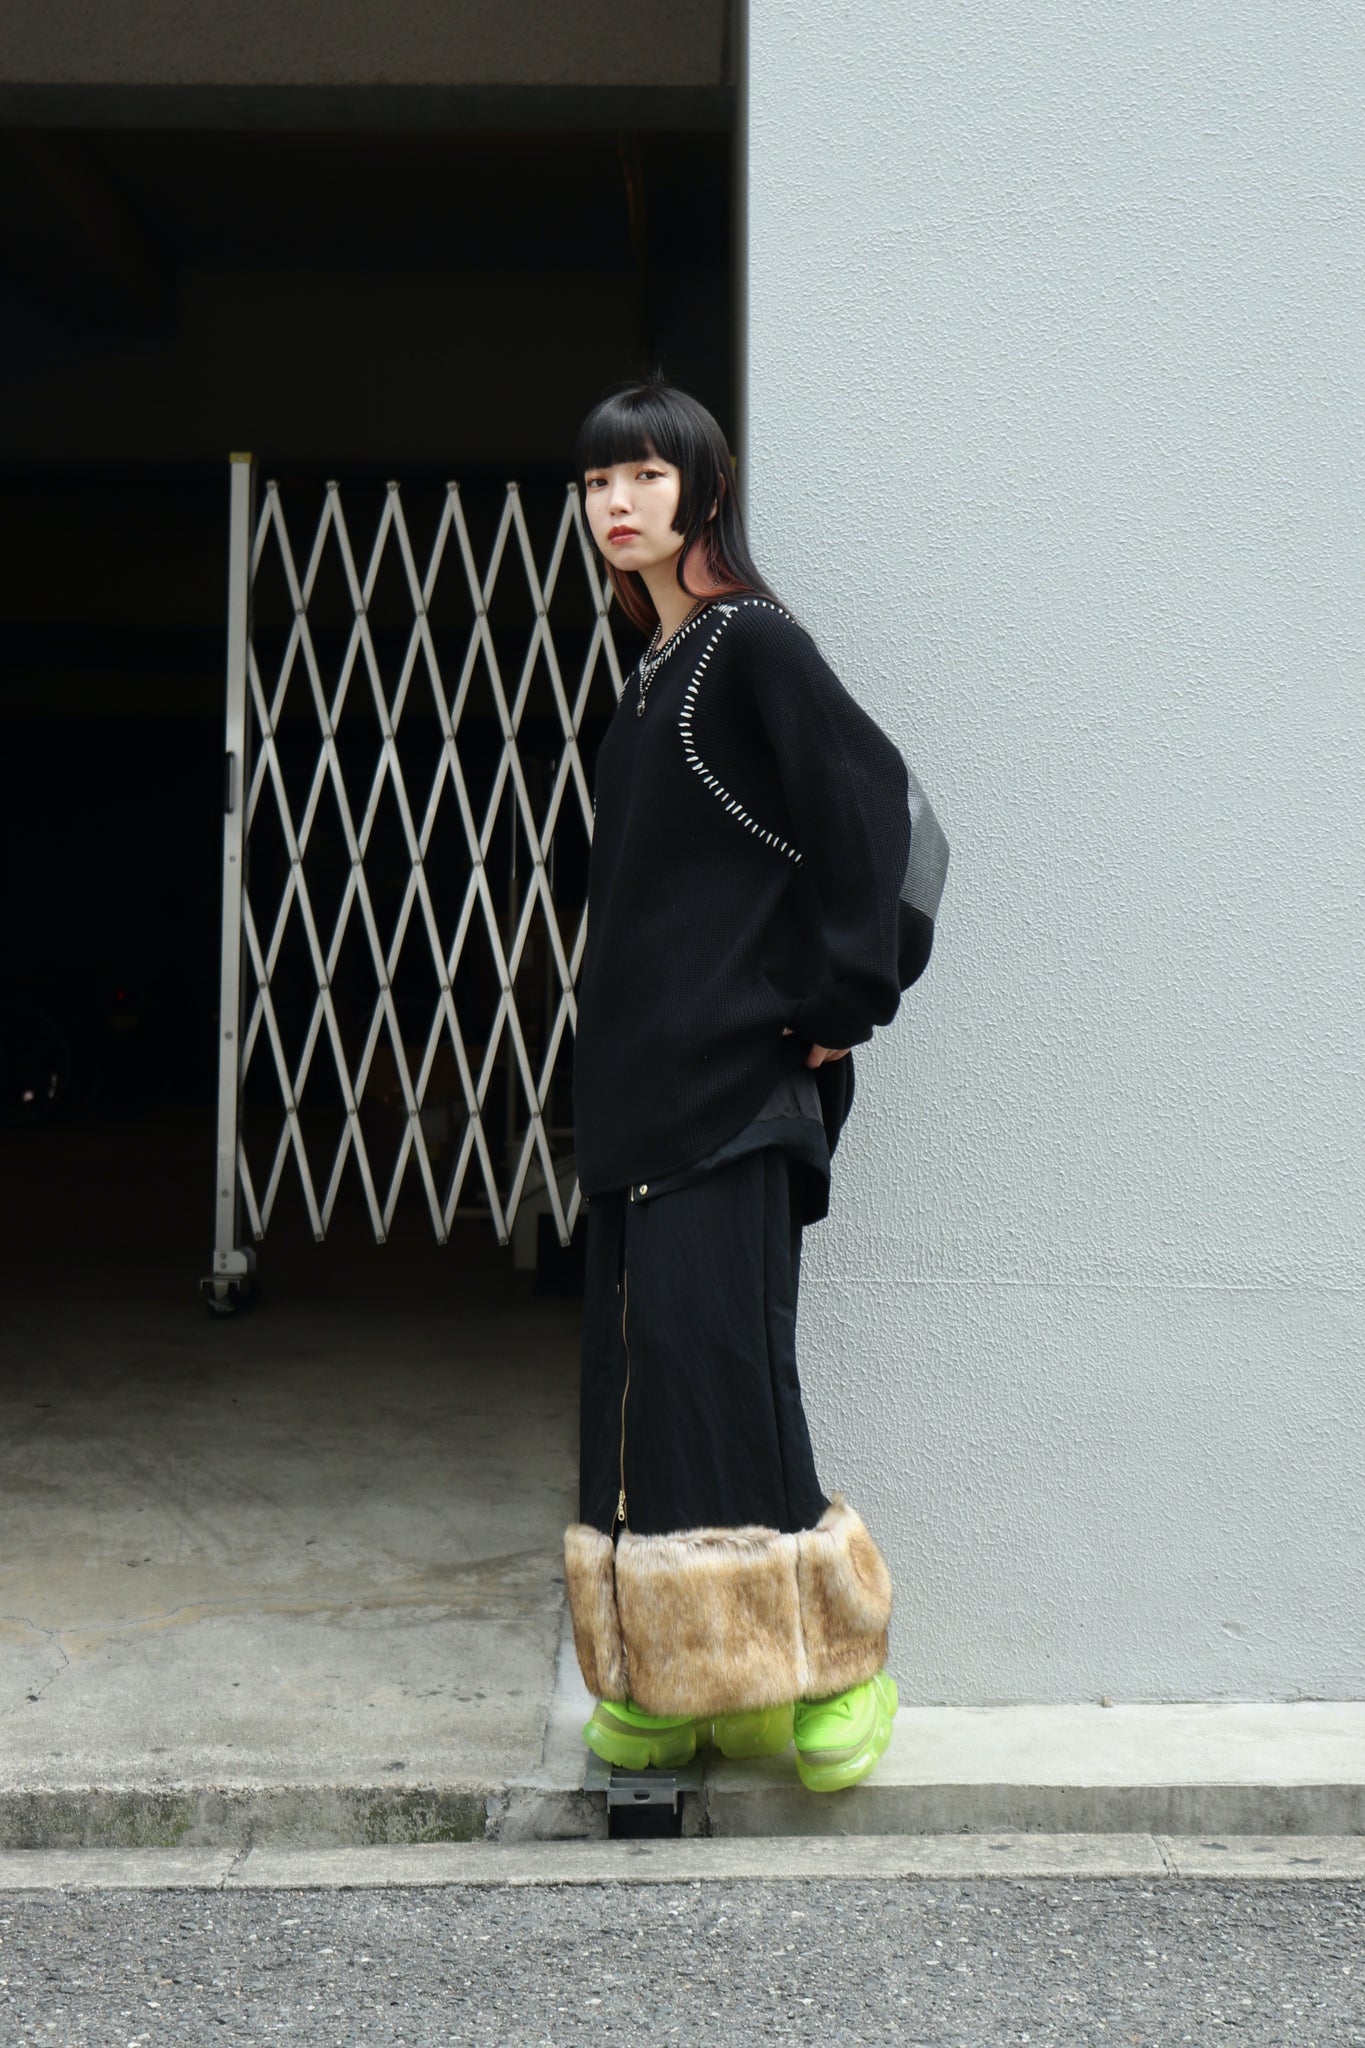 Styling image using SODUK 23aw Thermal Knit Pullover (Black)